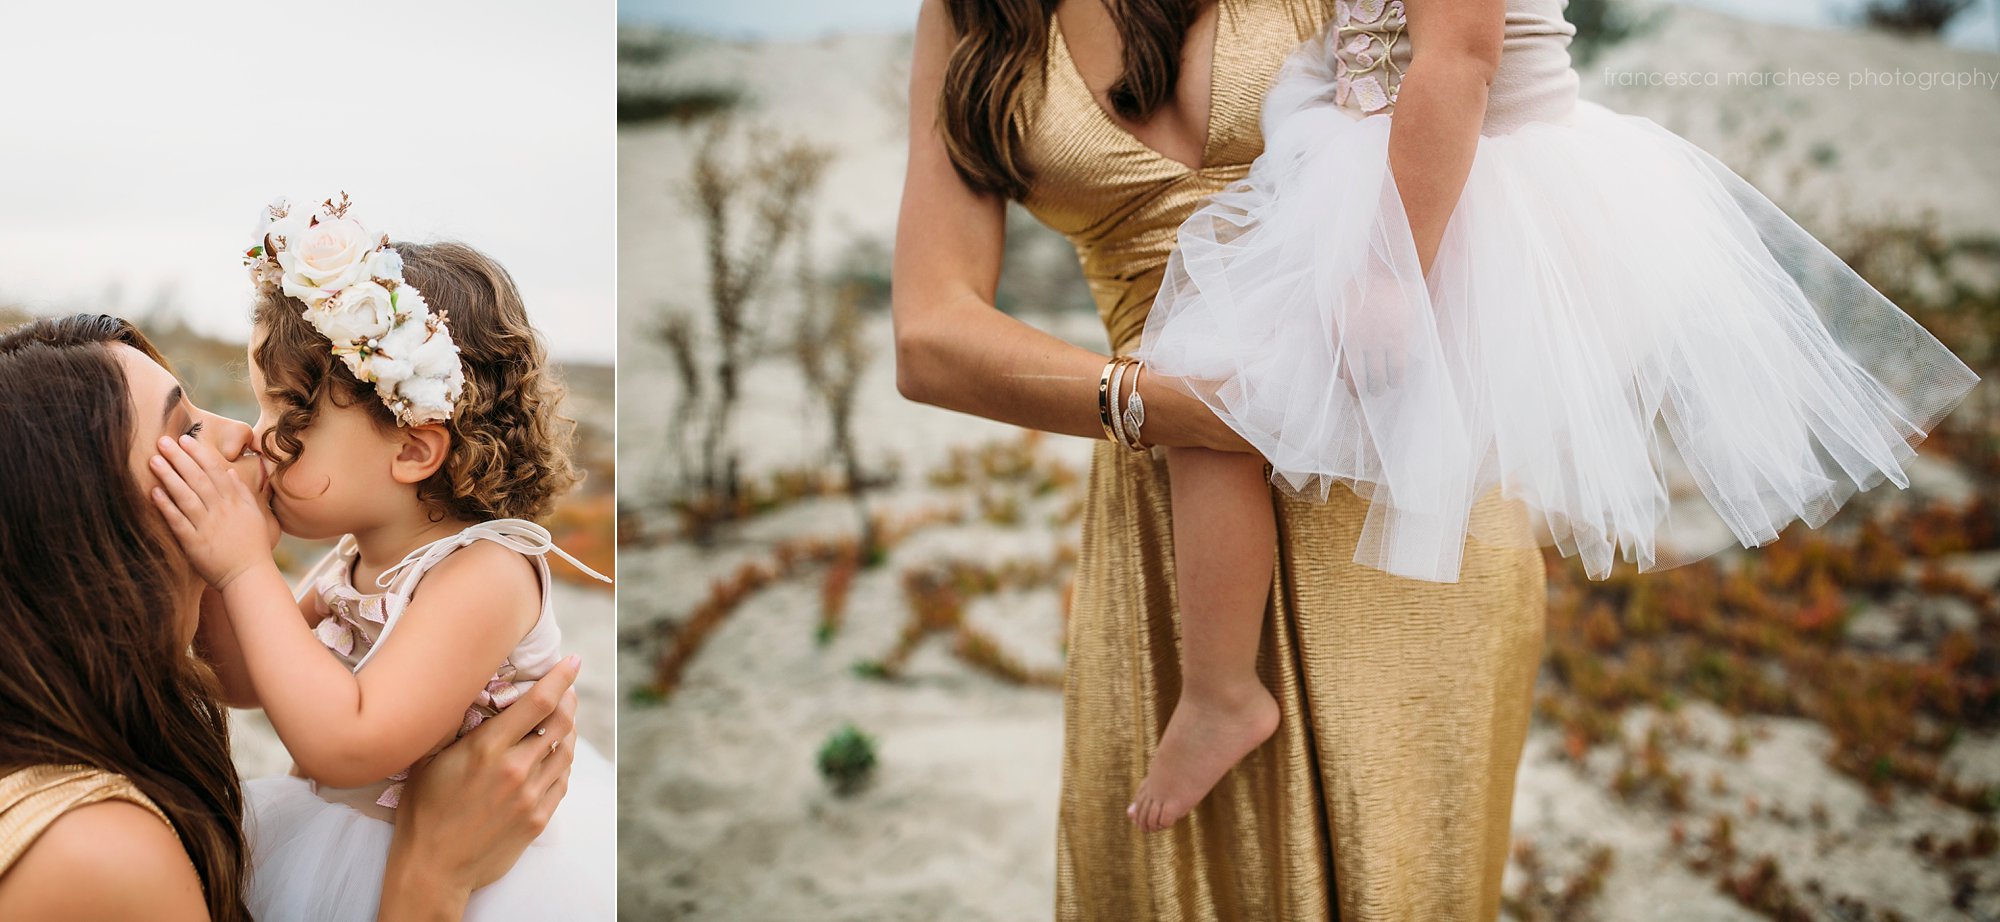 Francesca Marchese Photography - Family Photographer Starkman Family sunset beach session - gold sequins gown, floral crown